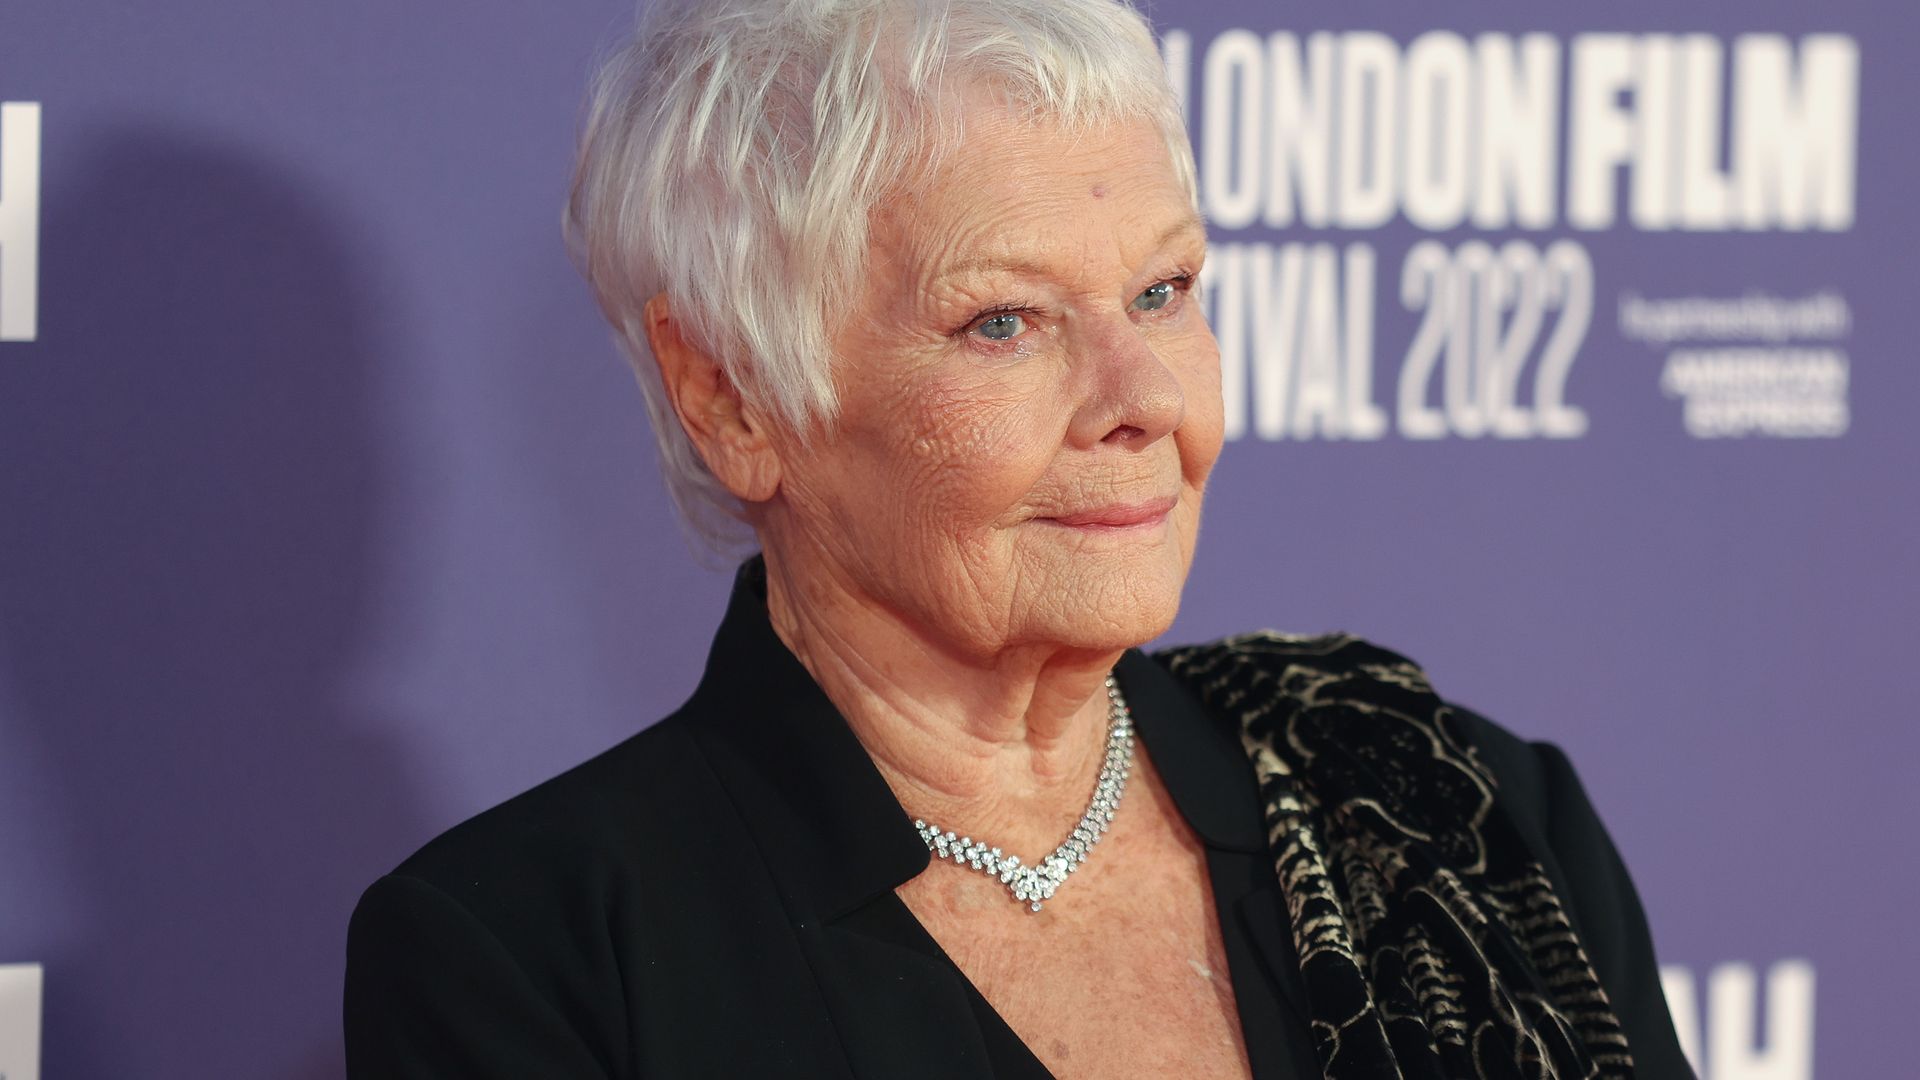 Judi Dench attends the "Allelujah" European Premiere during the 66th BFI London Film Festival at Southbank Centre on October 09, 2022 in London, England. (Photo by Mike Marsland/WireImage)